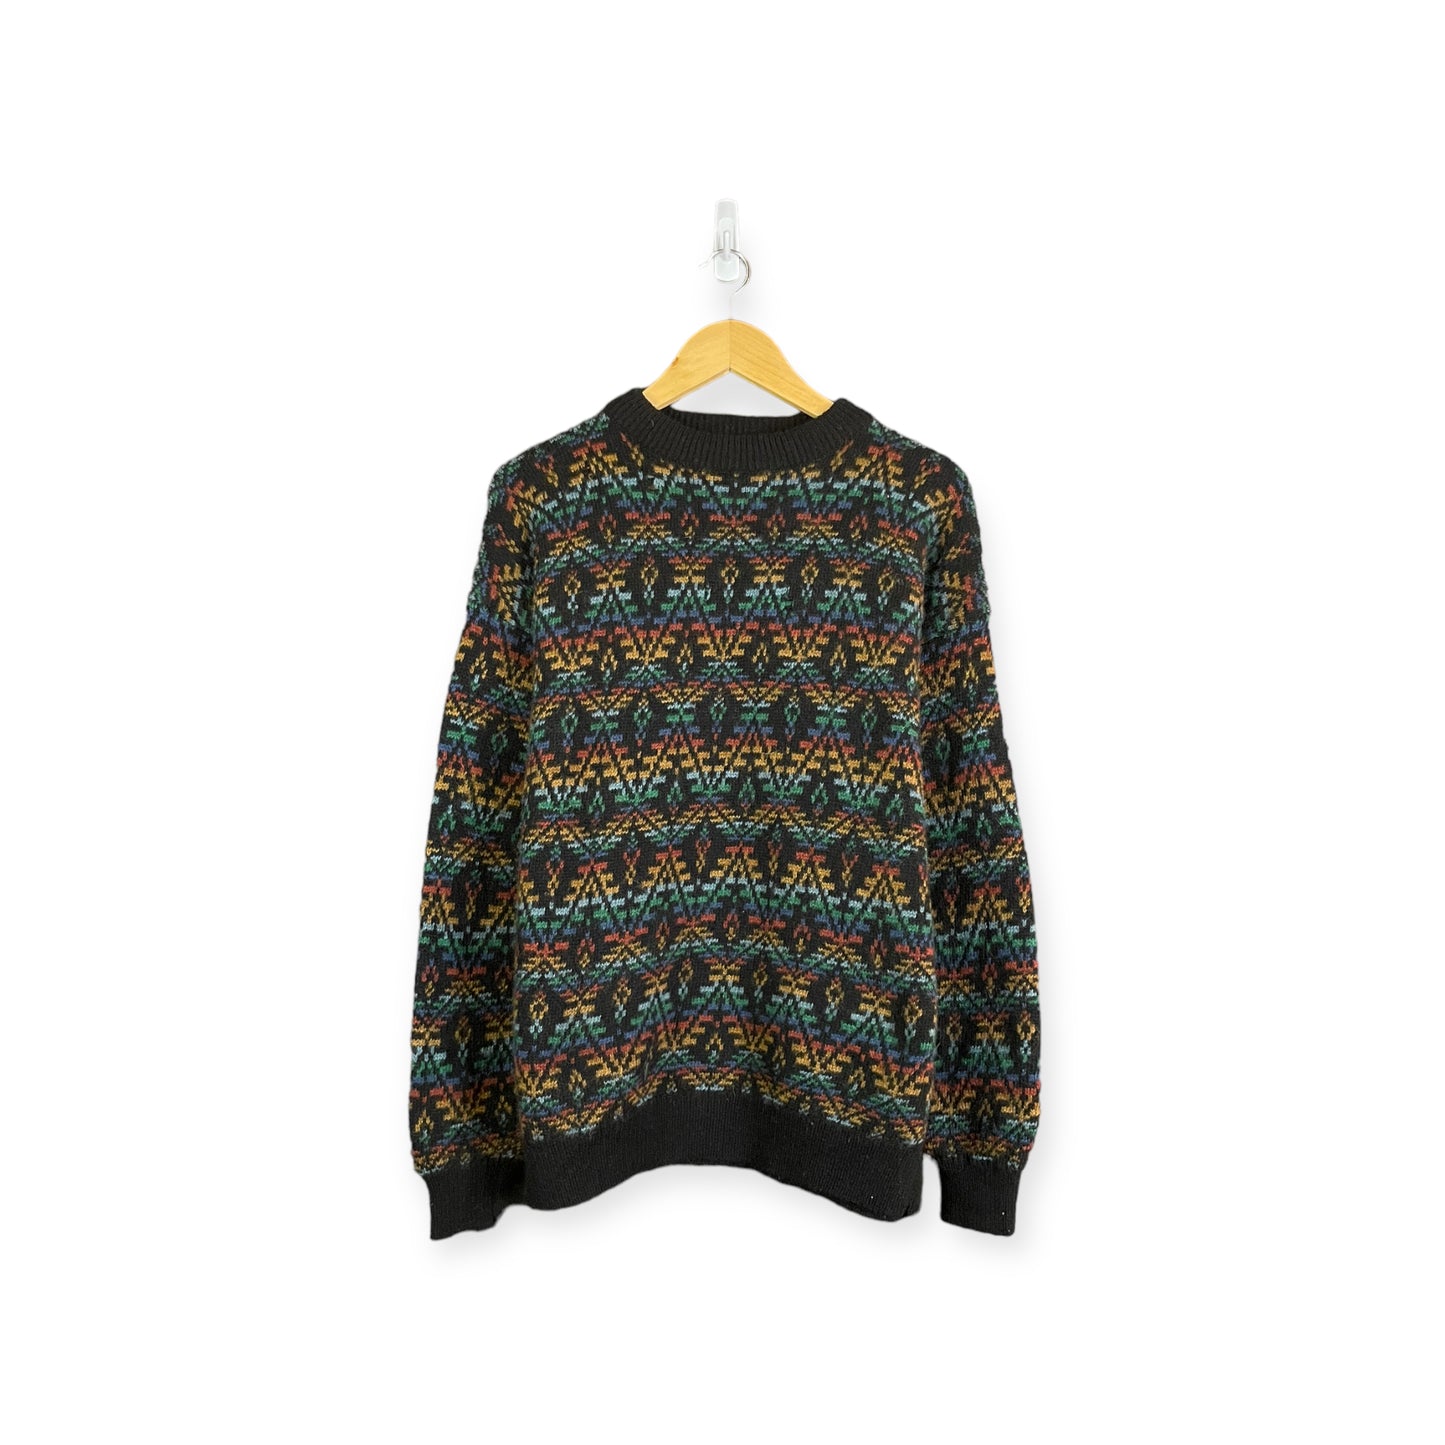 90s Pattern Knitted Sweater Sz. S